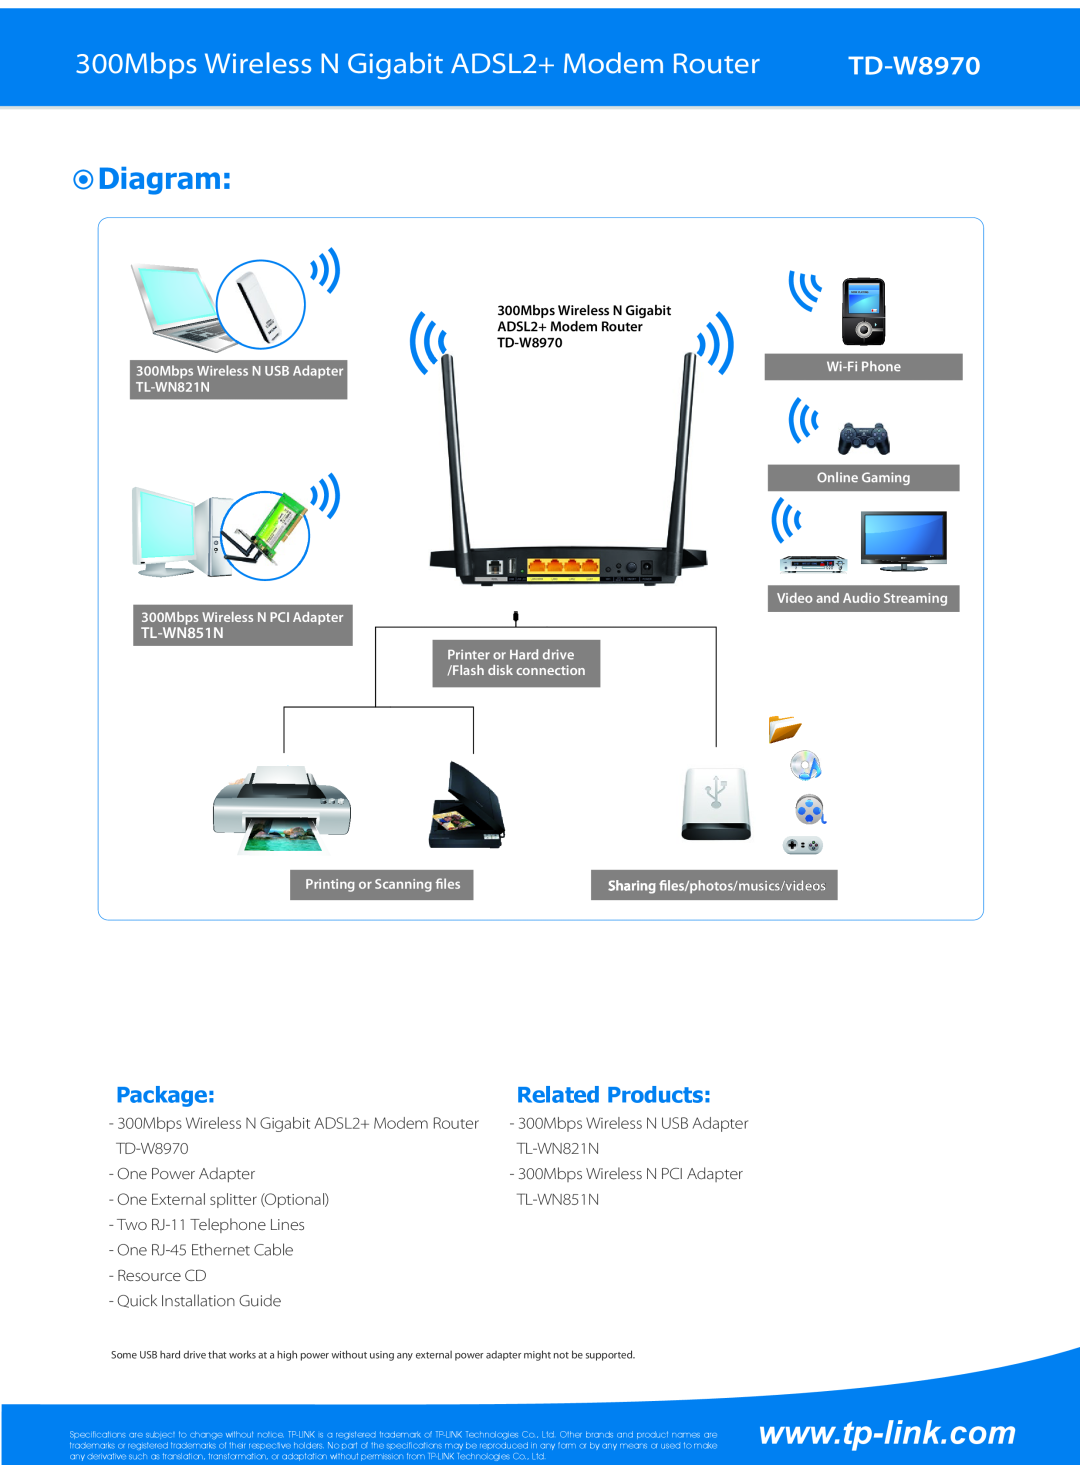 TP-Link td-w8970 Diagram, 300Mbps Wireless N Gigabit ADSL2+ Modem Router, TD-W8970, Package, Related Products, TL-WN851N 